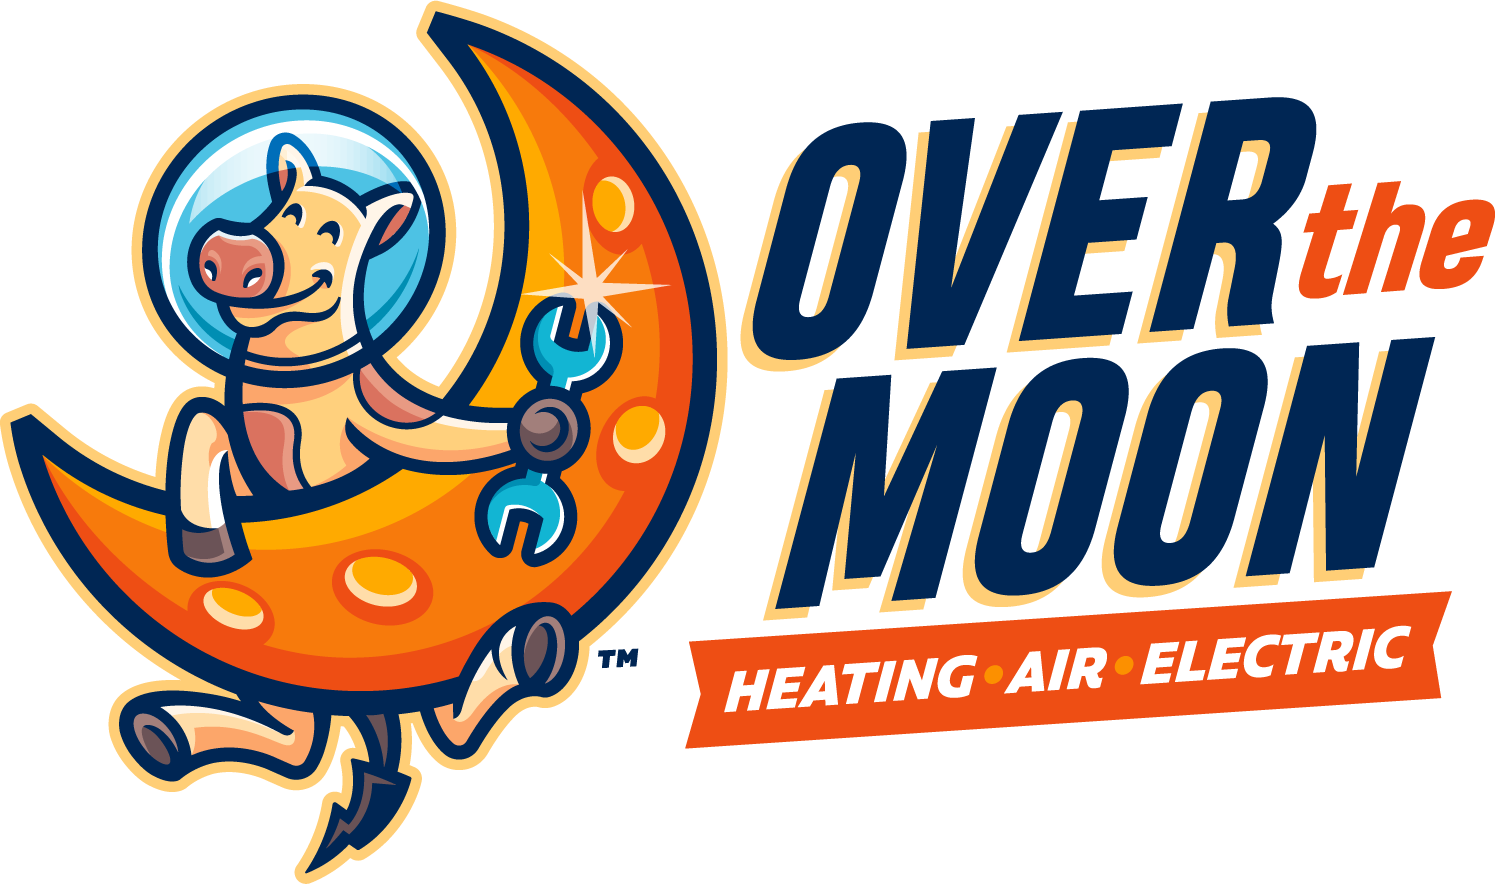 Over the Moon Heating, Air & Electric Logo